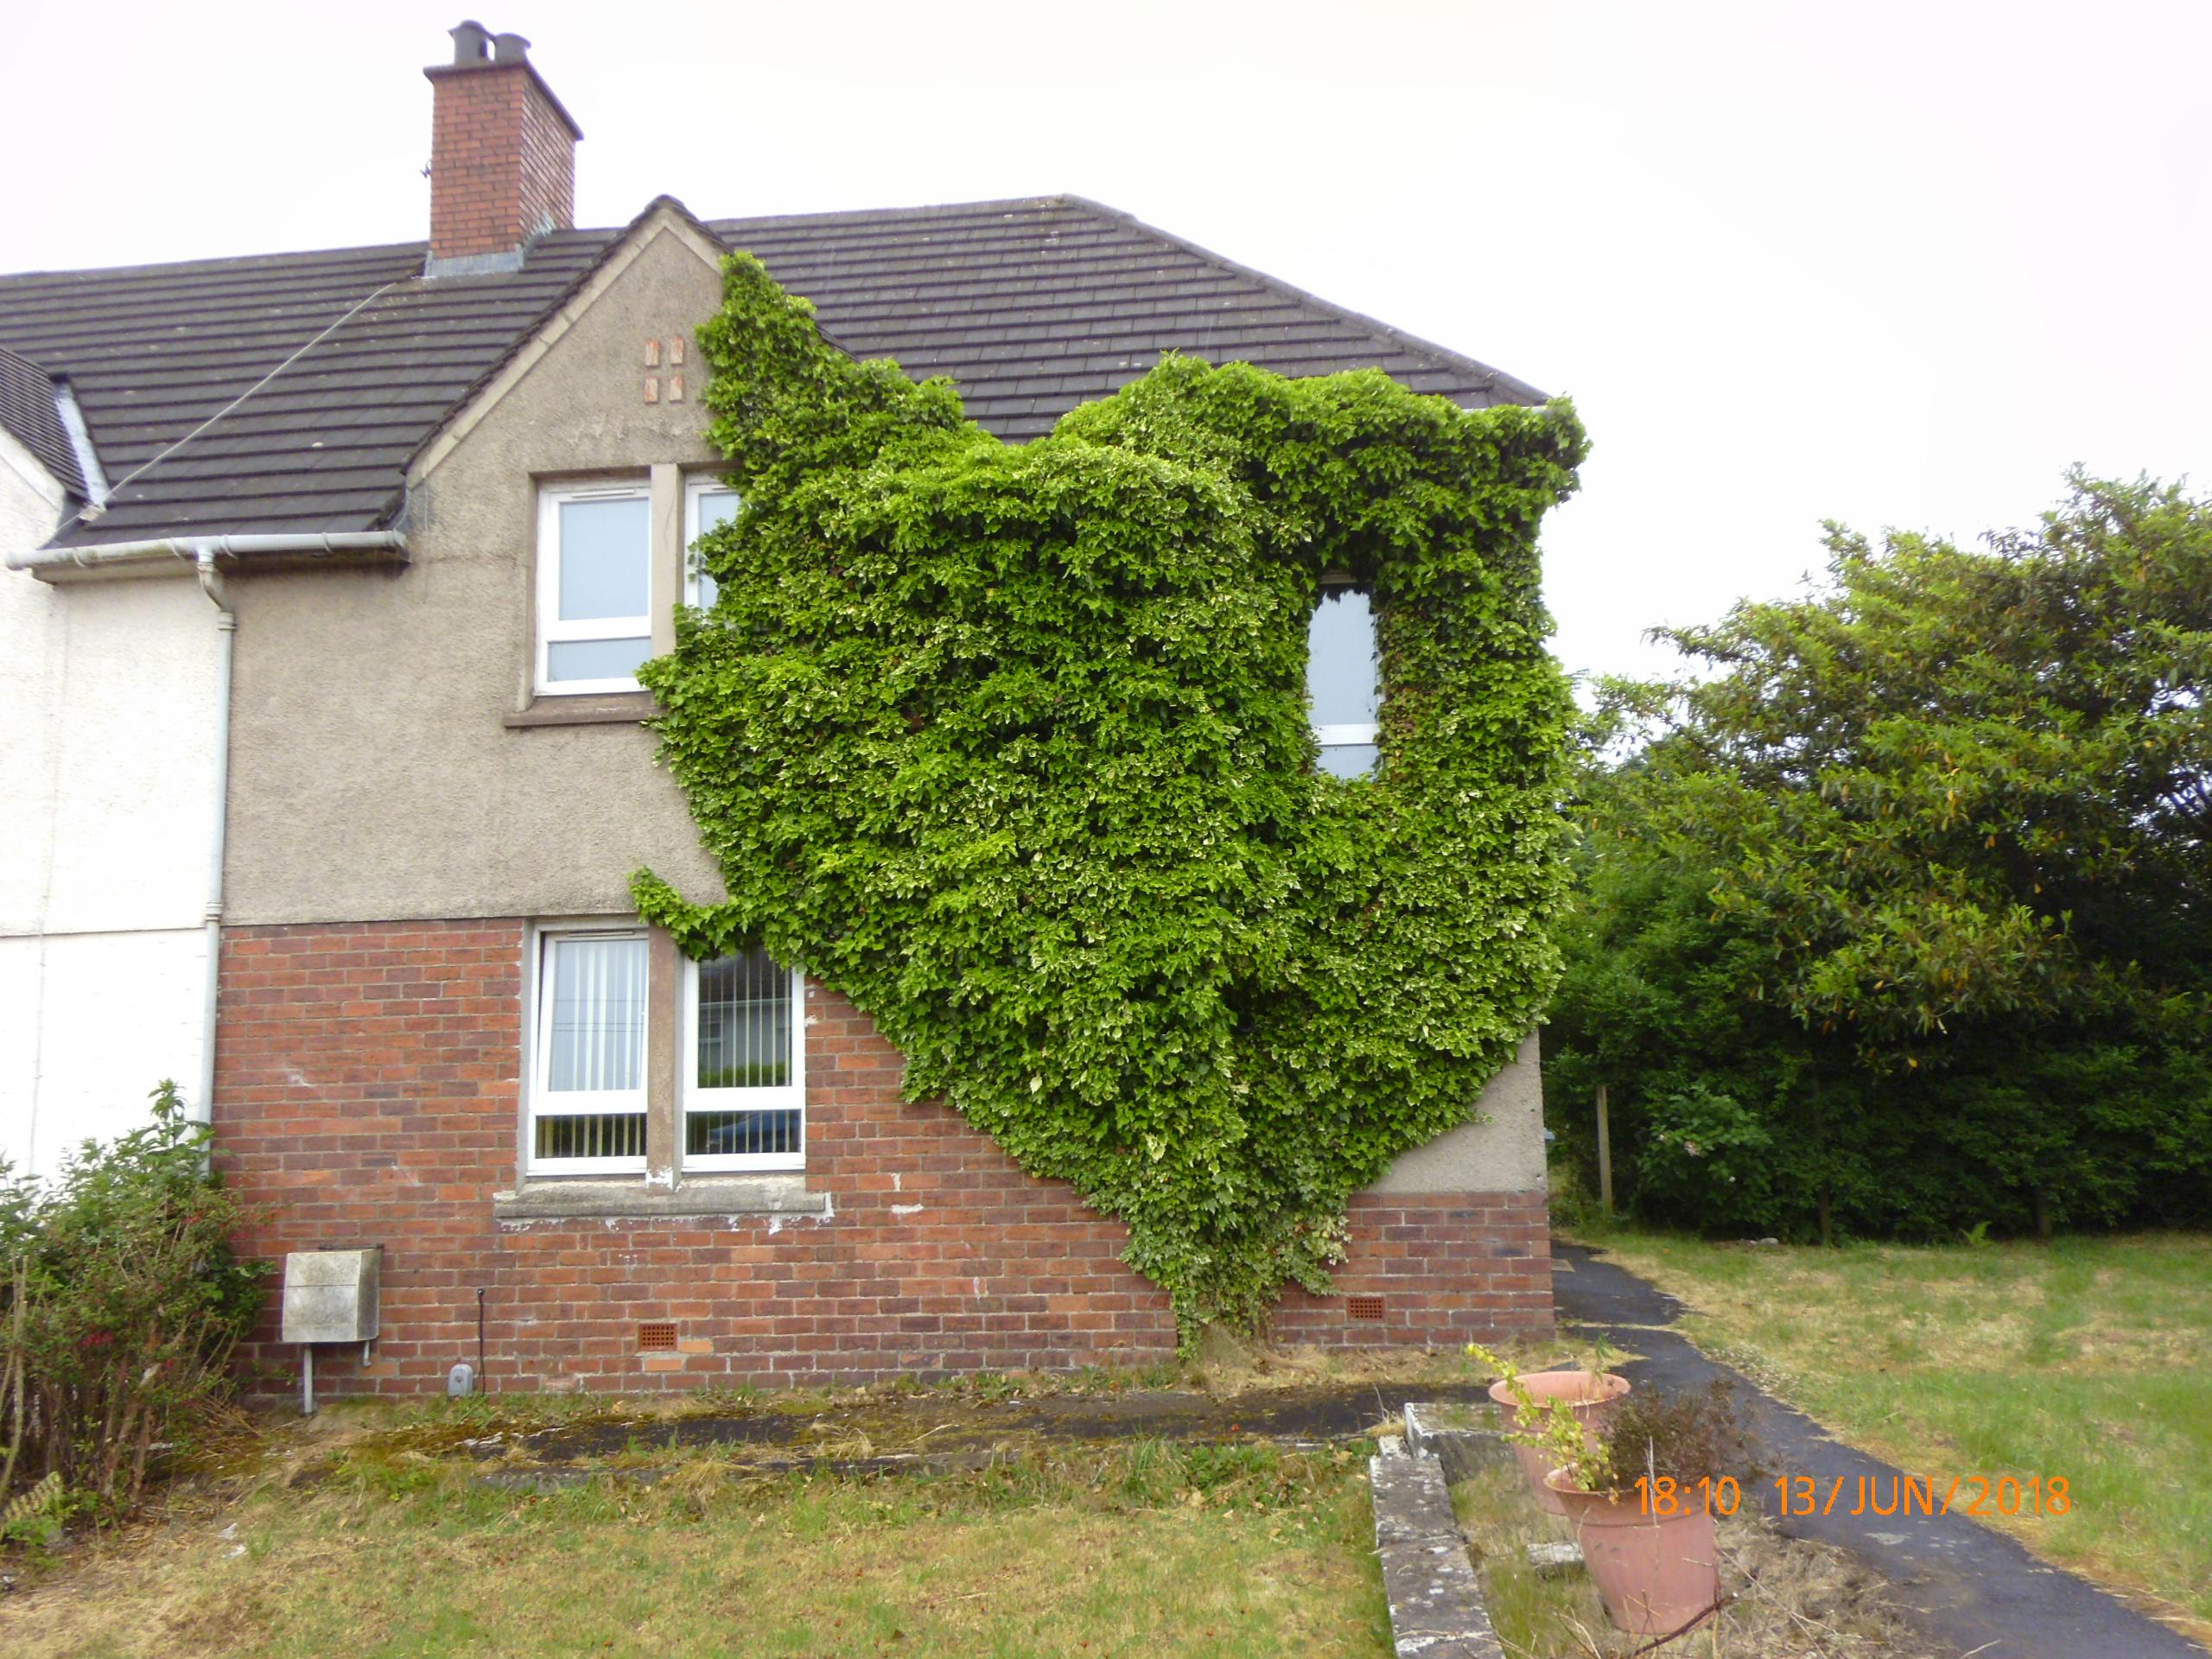 Free stock photo of Green Plant, heart, House Ivy